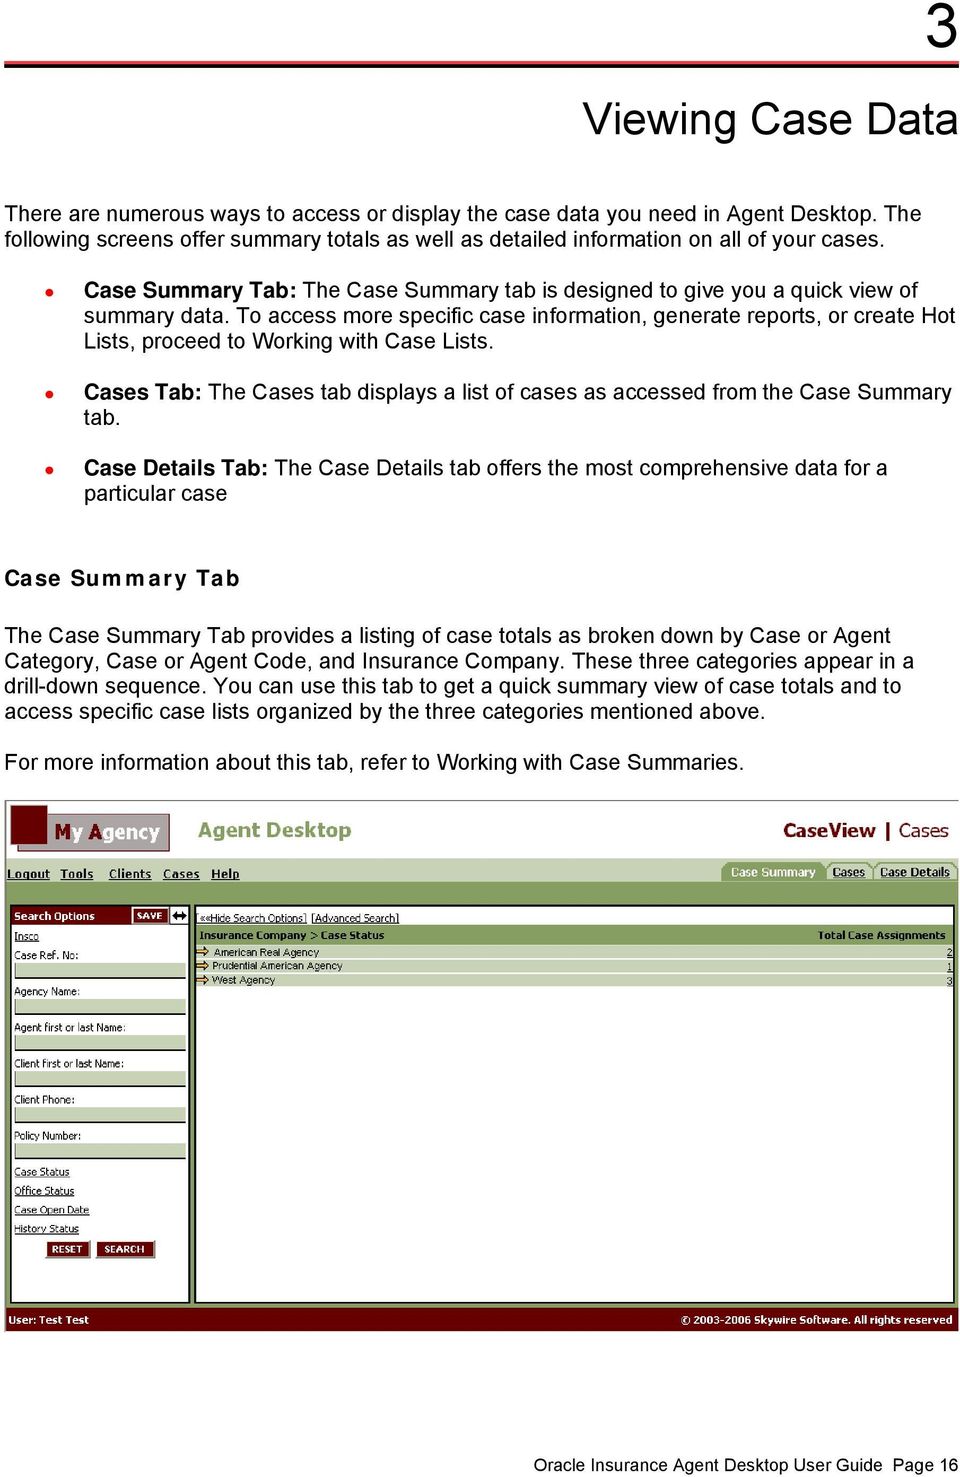 To access more specific case information, generate reports, or create Hot Lists, proceed to Working with Case Lists.